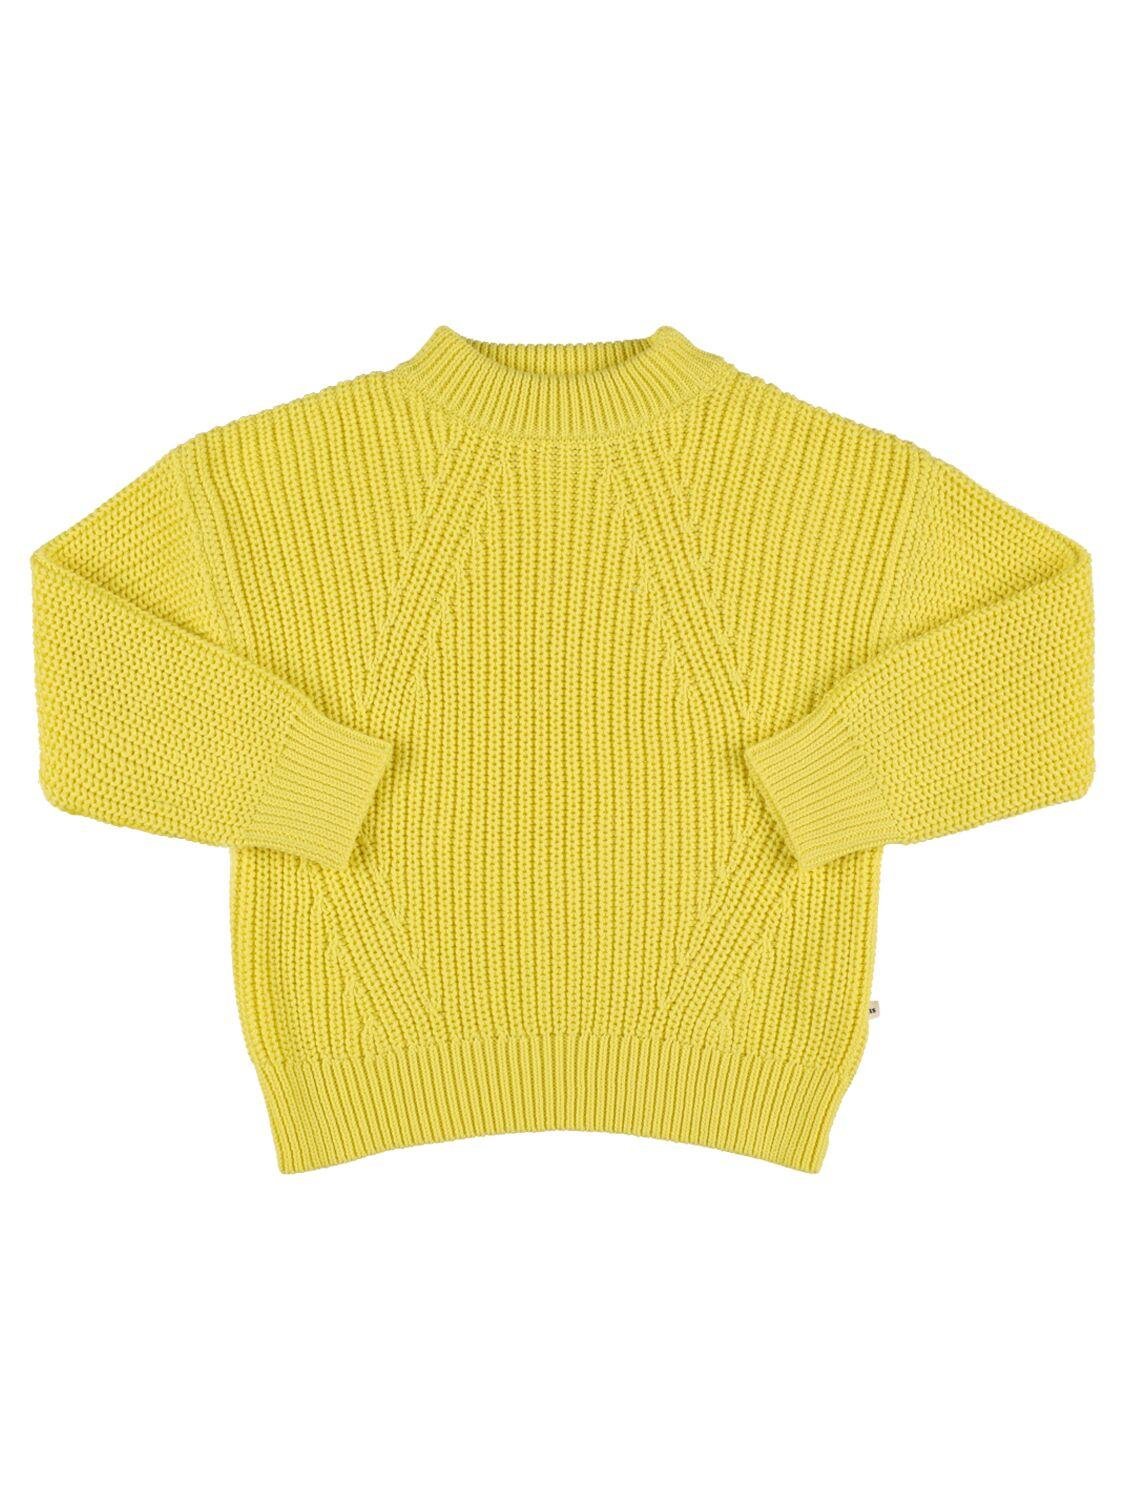 Organic Cotton Knit Sweater by THE NEW SOCIETY